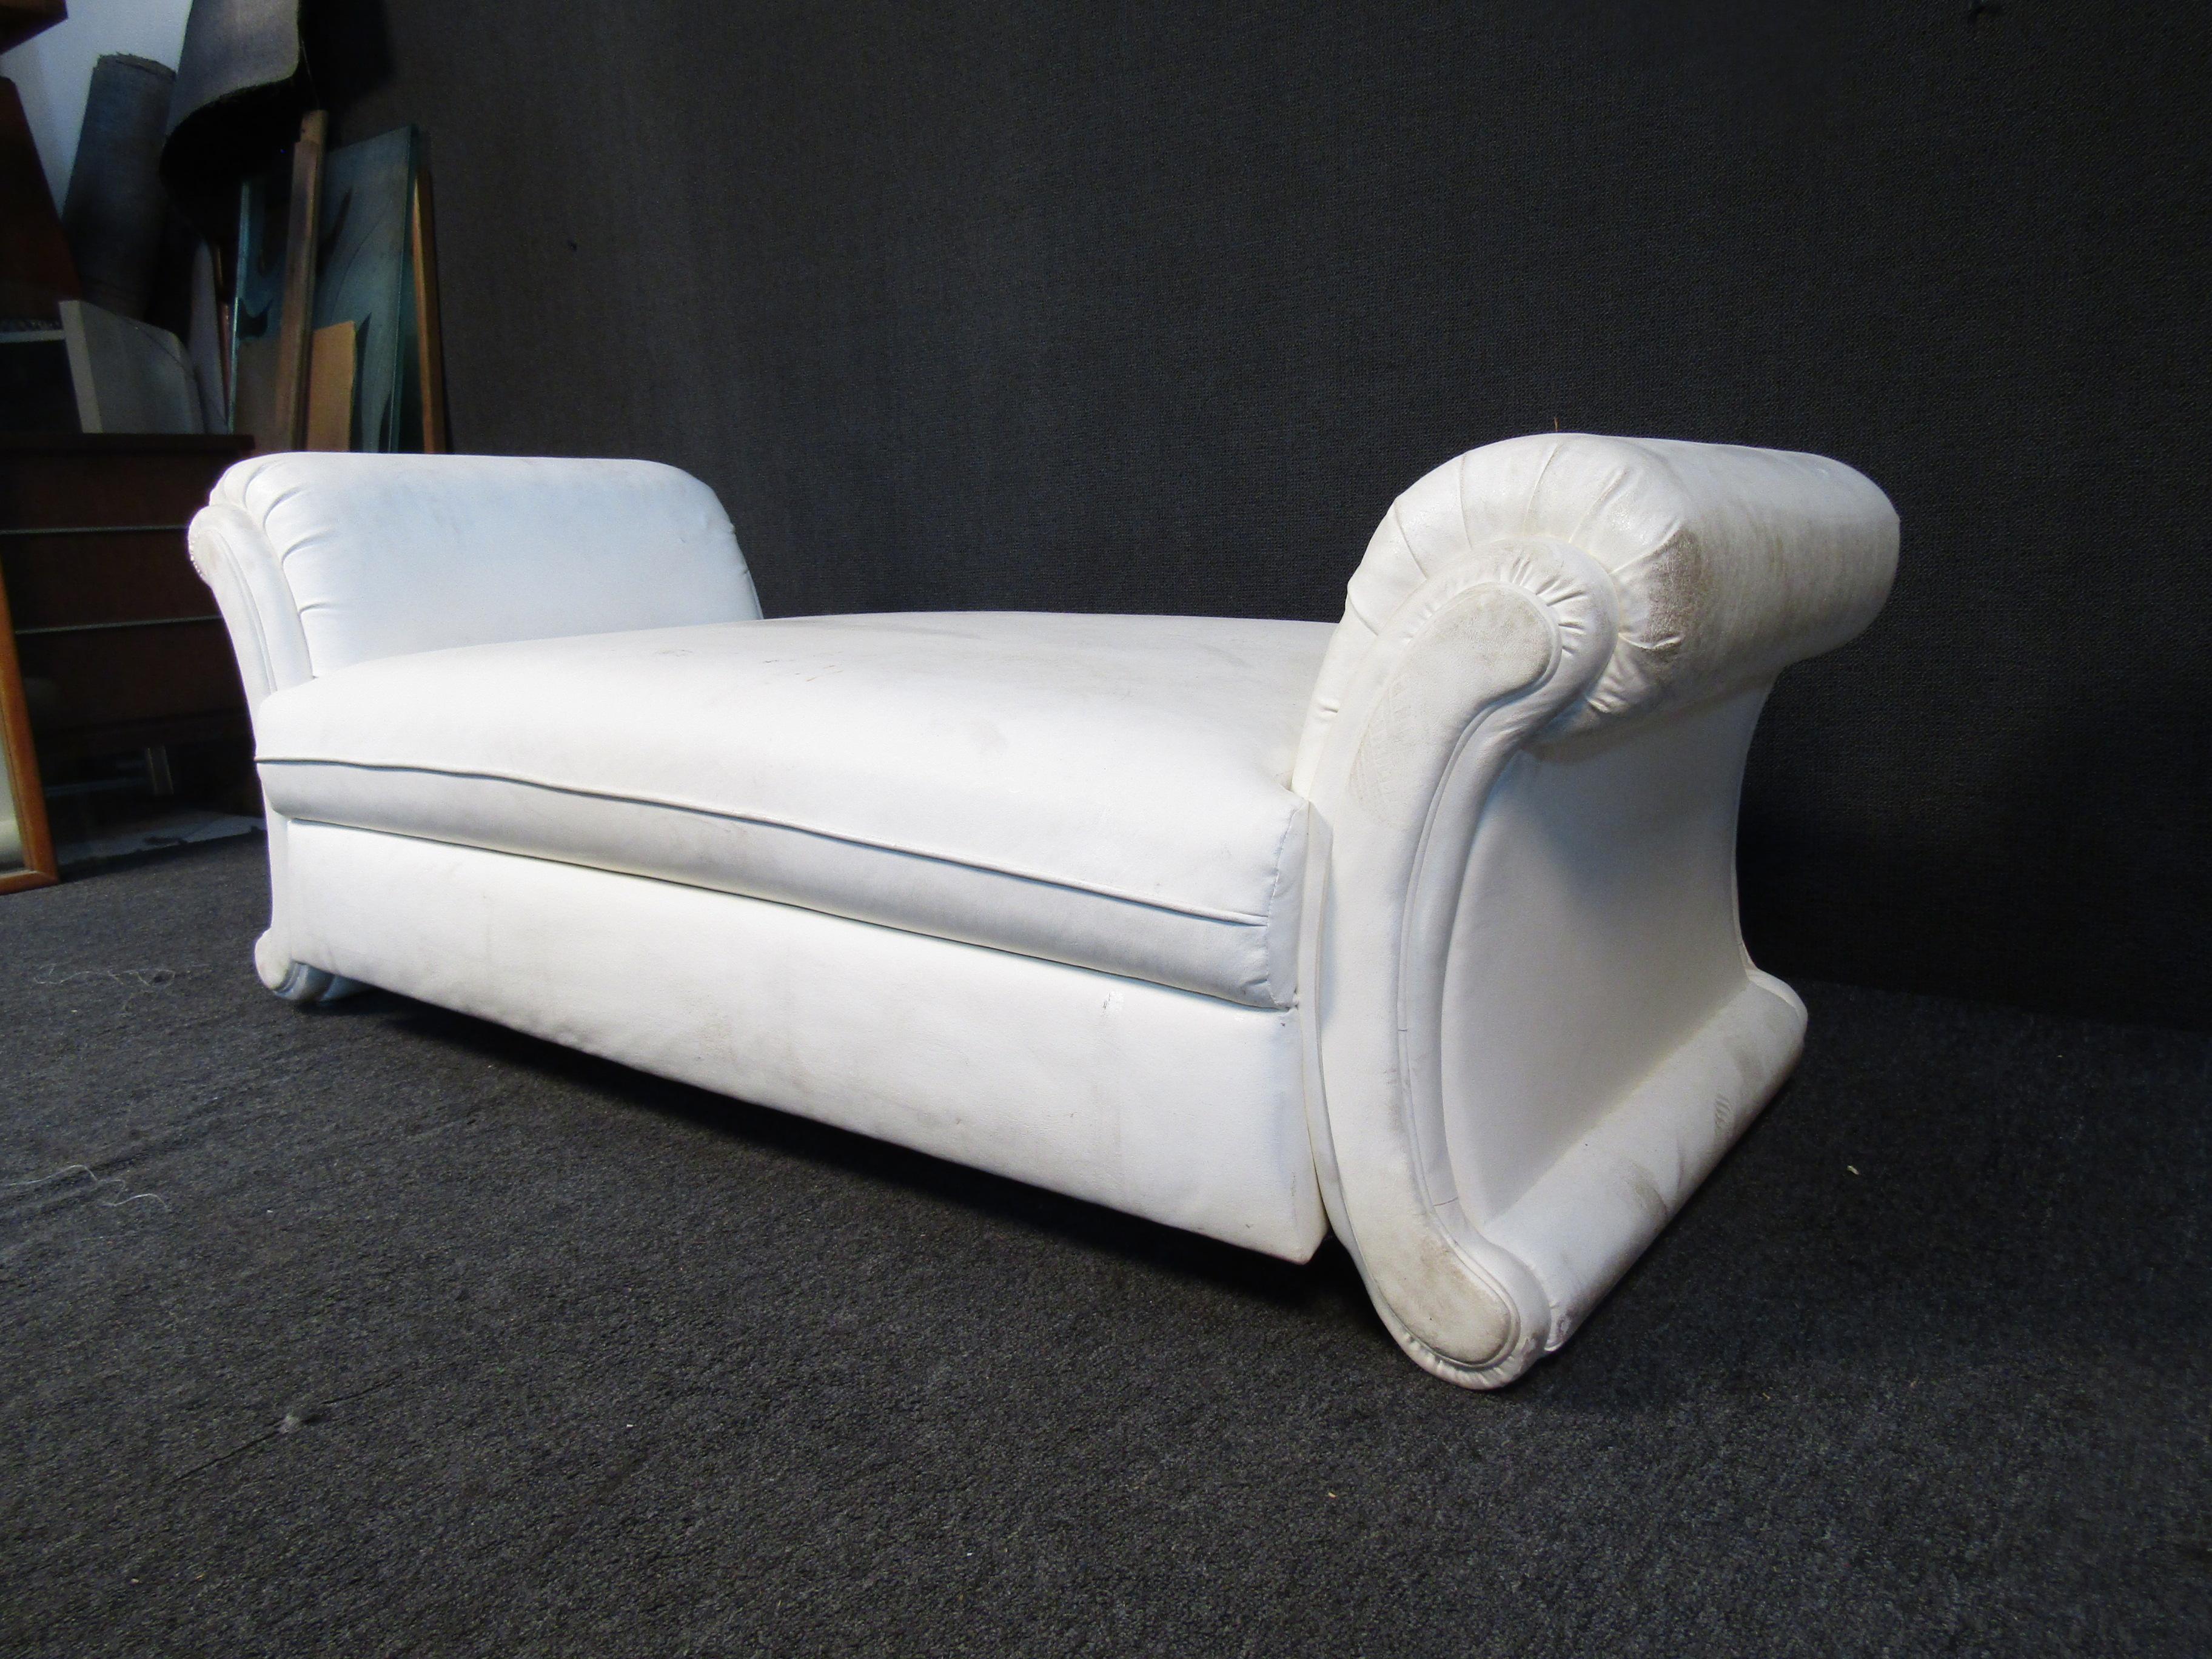 This large and unique white loveseat features curving arms and white vinyl upholstery. Please confirm item location with seller (NY/NJ).